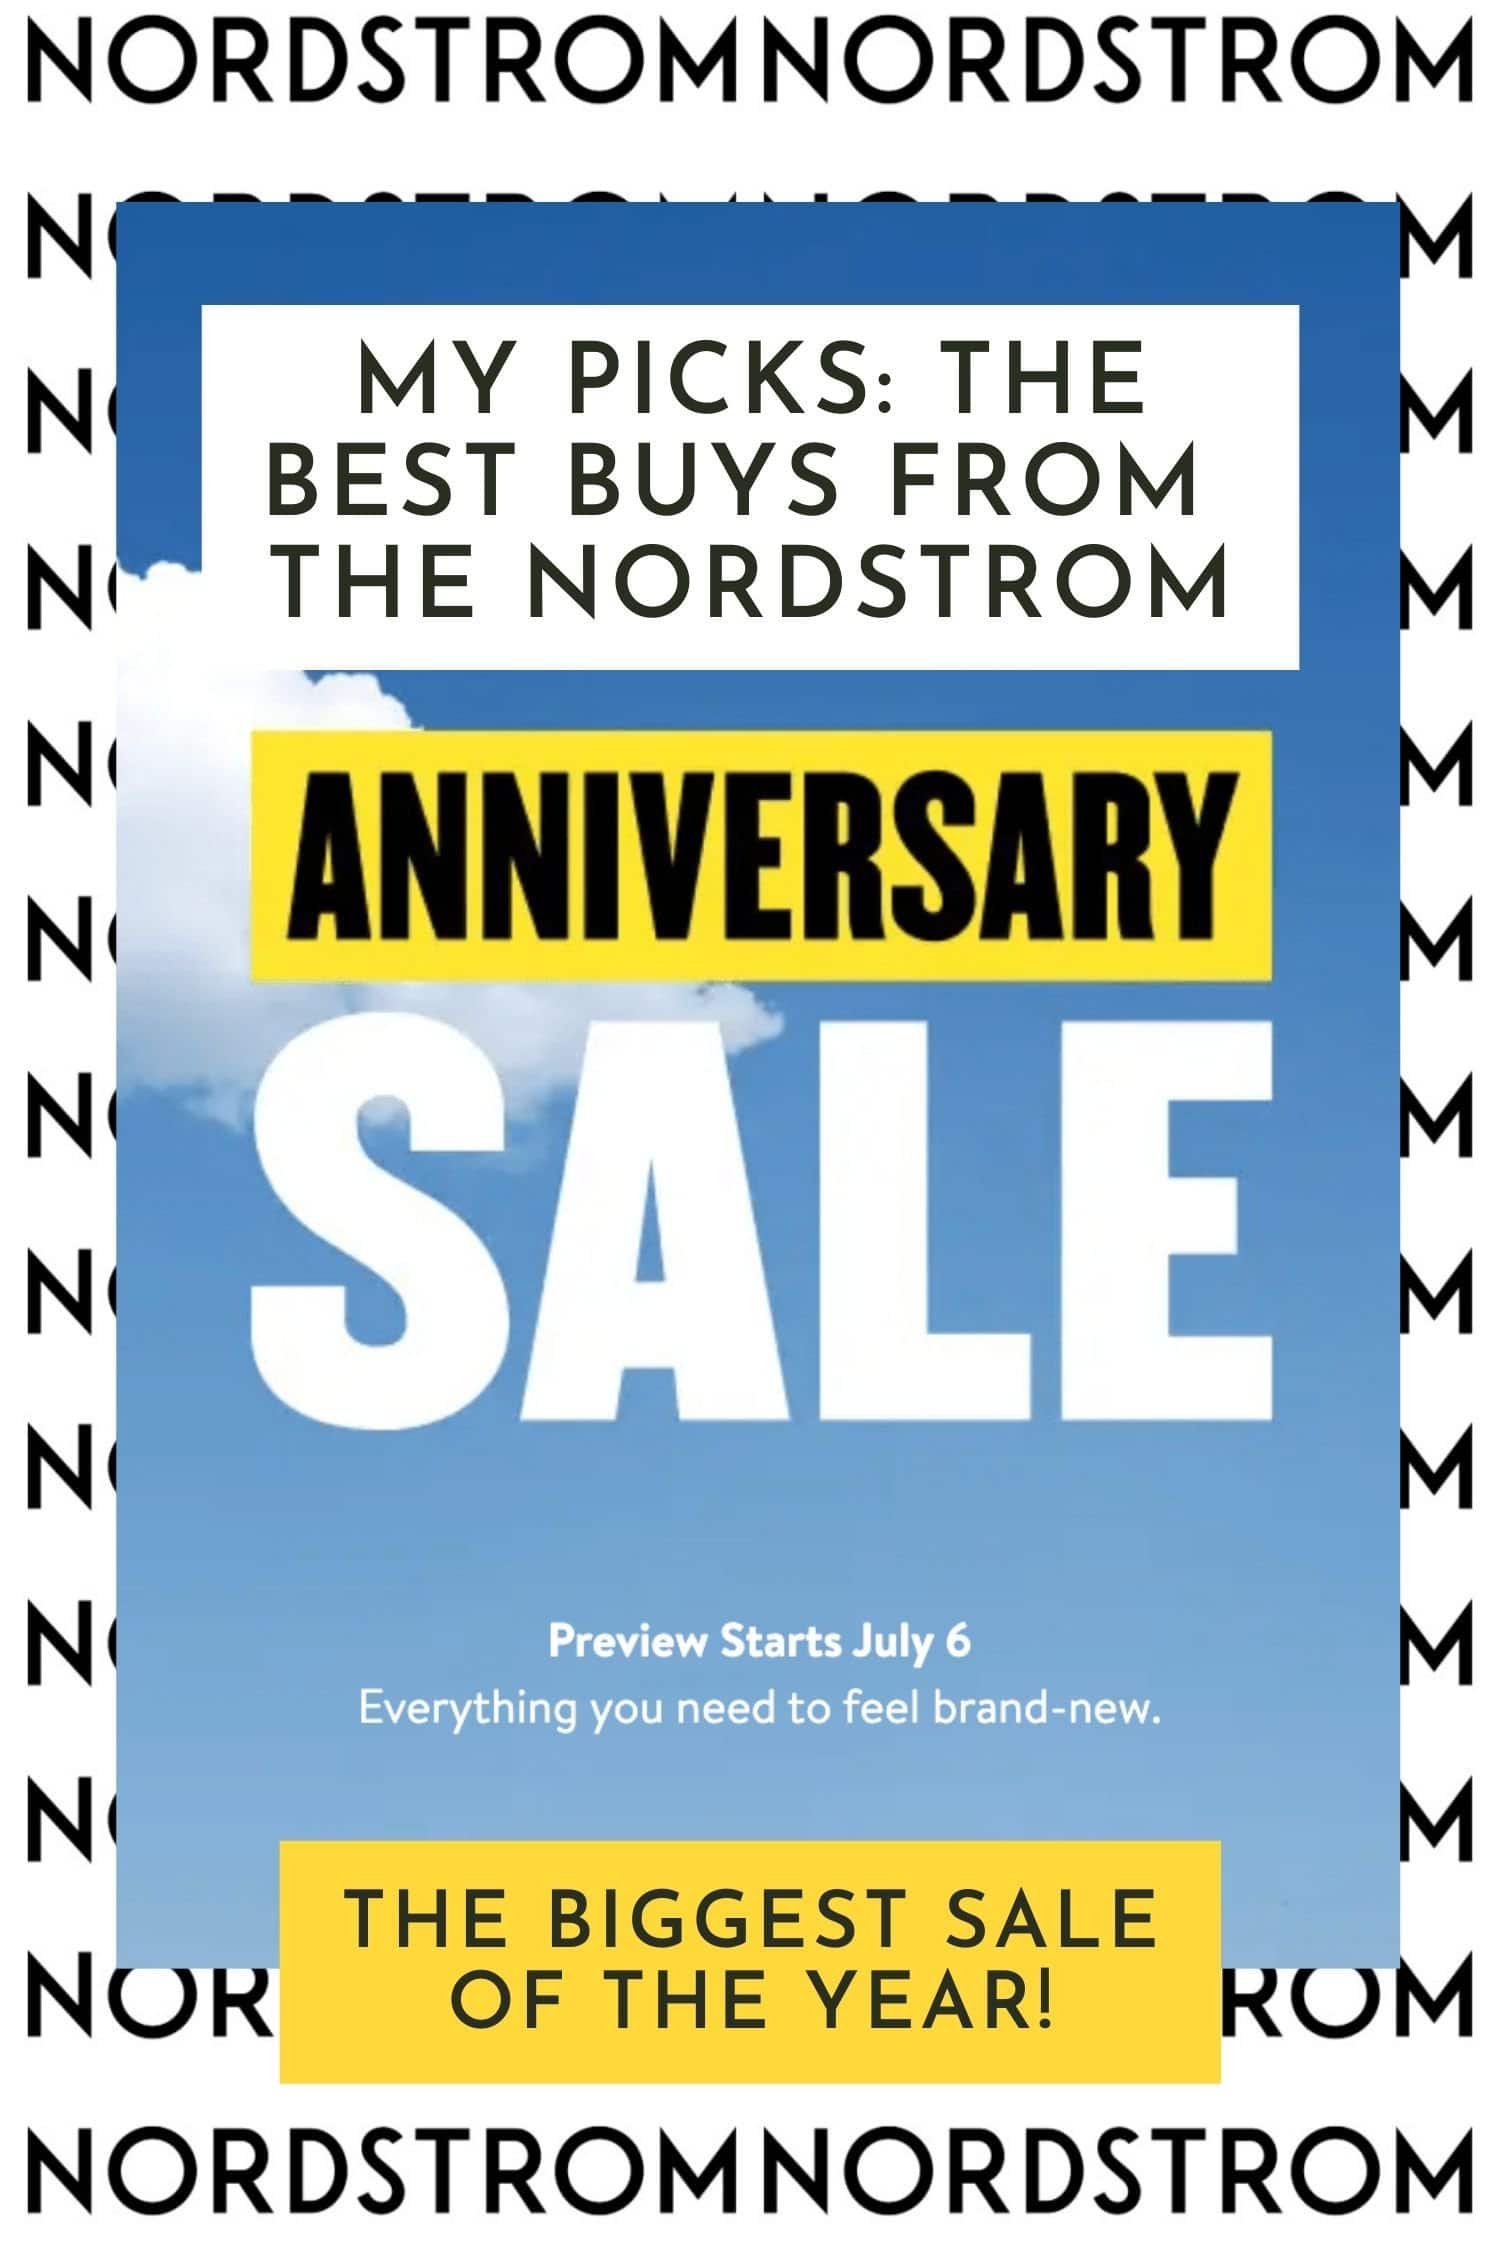 Nordstrom's Biggest Sale Of The Year - The Anniversary Sale! 